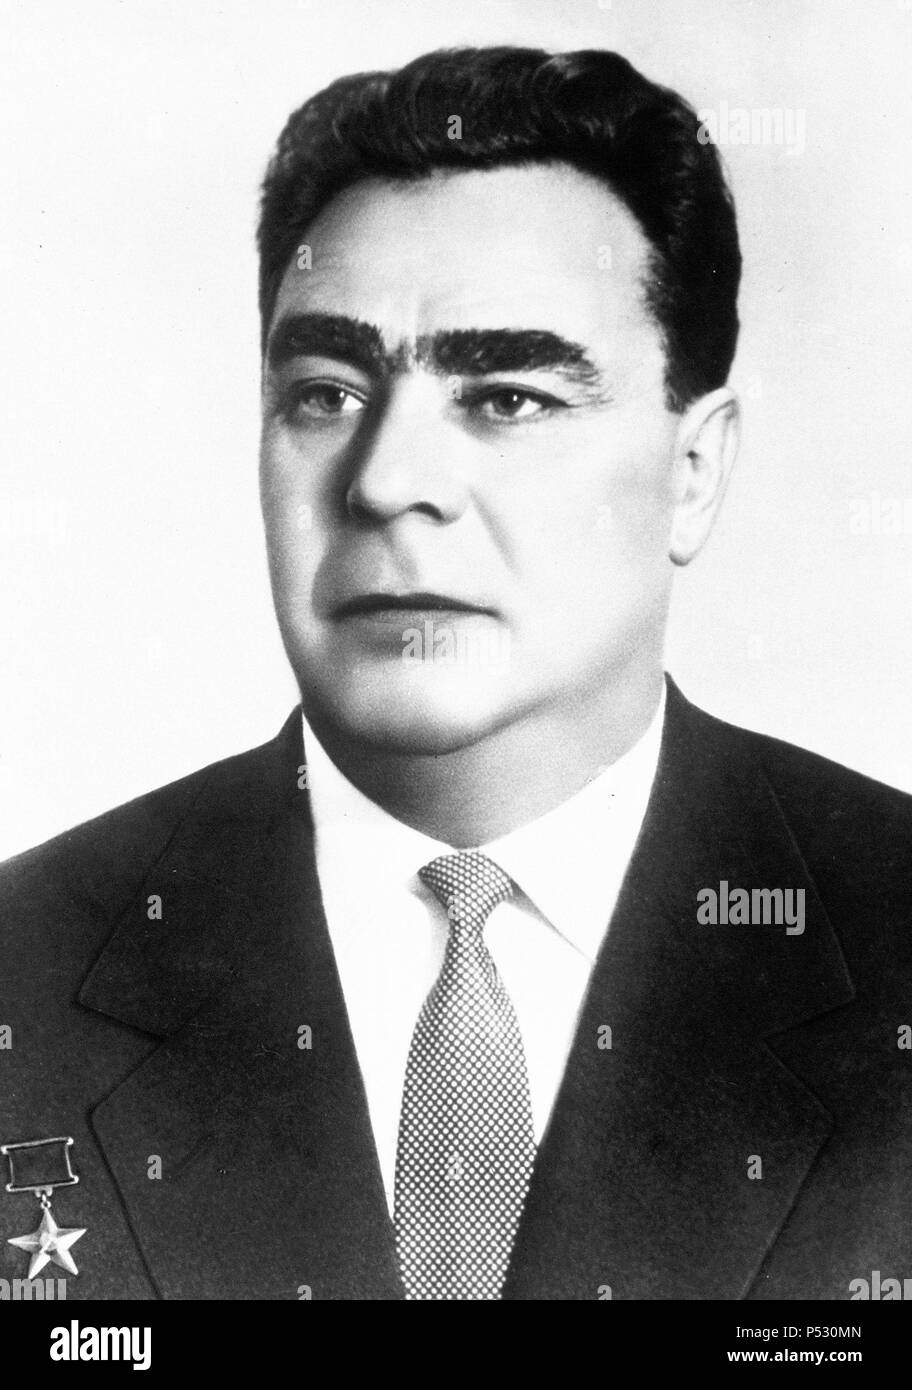 Leonid Brezhnev, General Secretary of the Central Committee of the Communist Party of the Soviet Union. Stock Photo